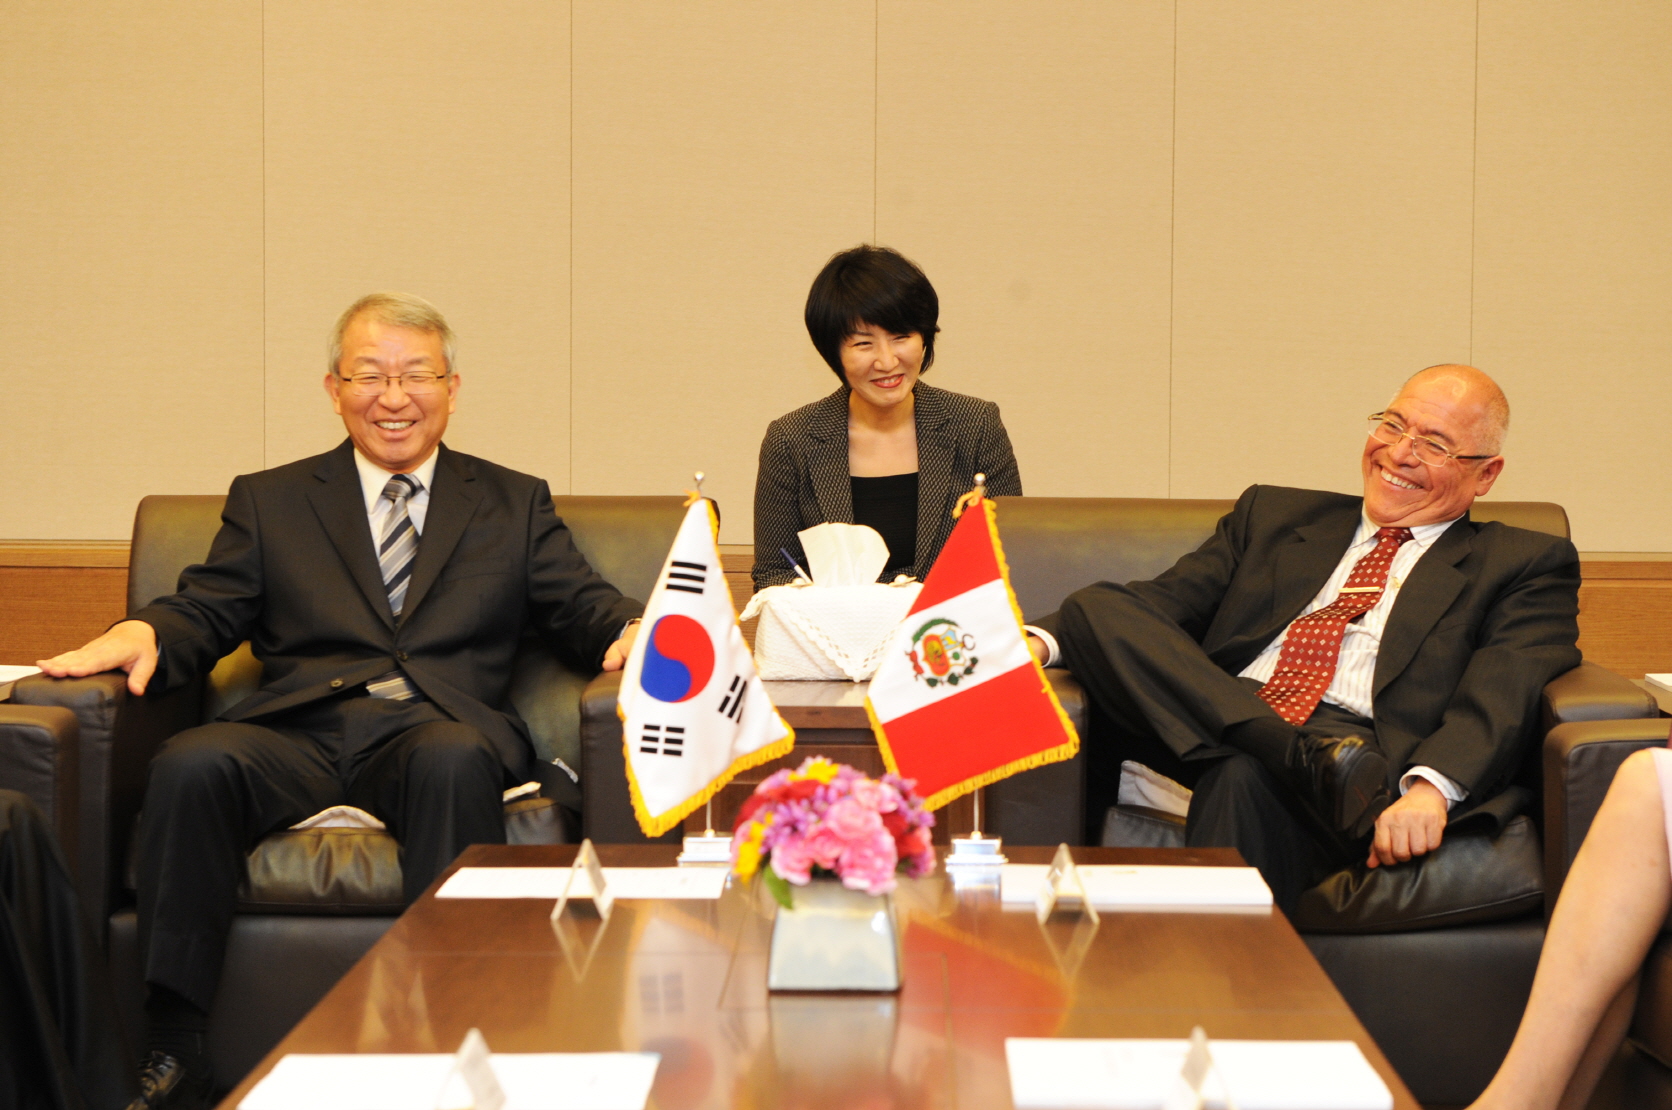 [04_17_12]Chief Justice of Peru visits the Supreme Court of Korea